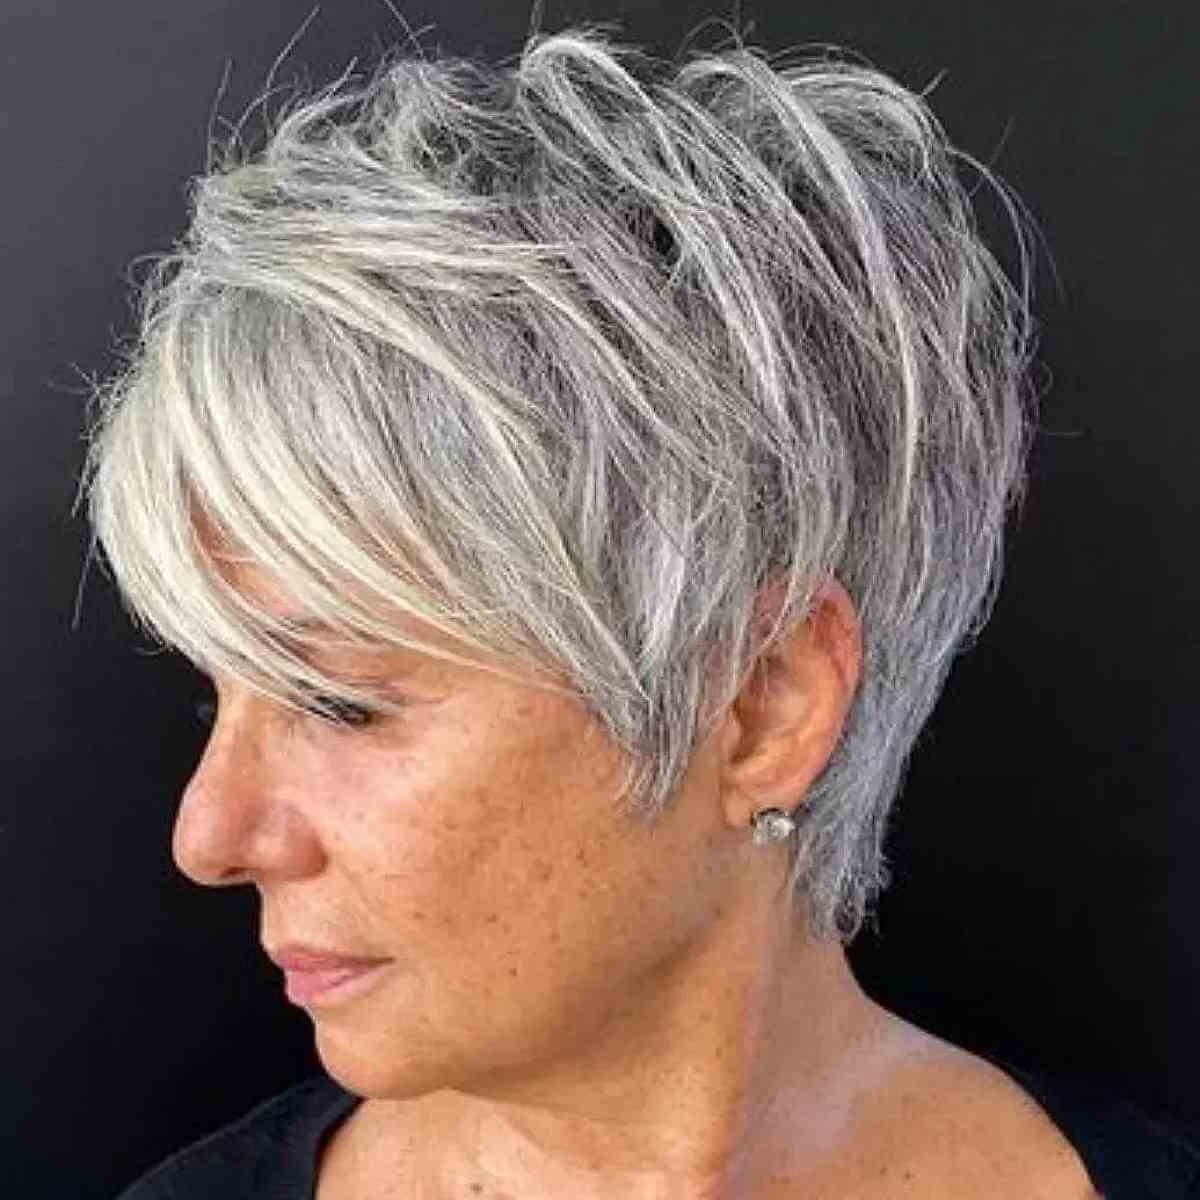 Tapered Salt and Pepper Pixie